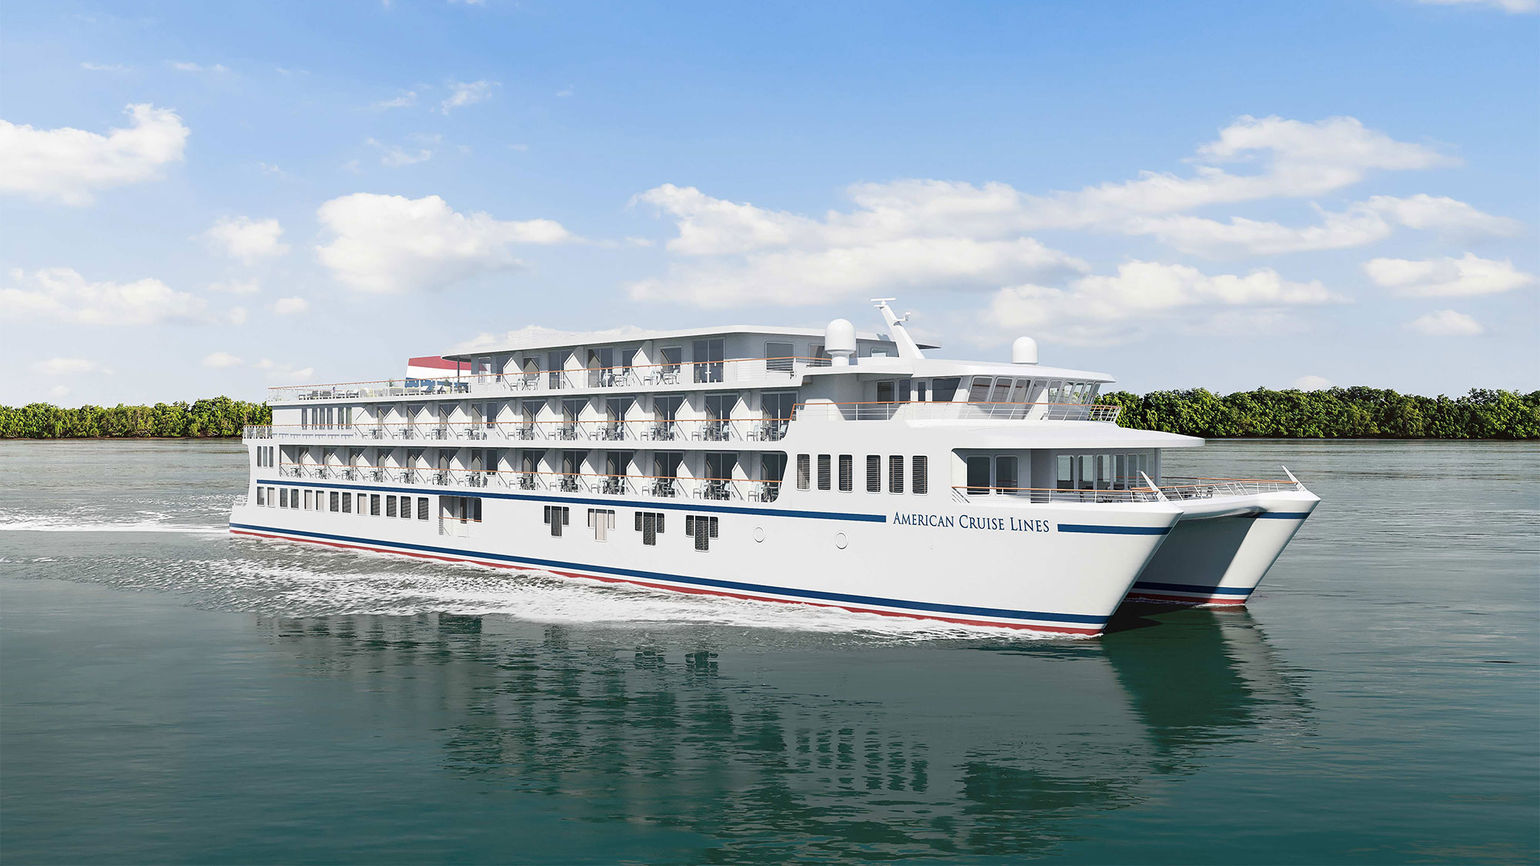 American Cruise Lines plans major expansion with small, catamaran-style vessels: Travel Weekly